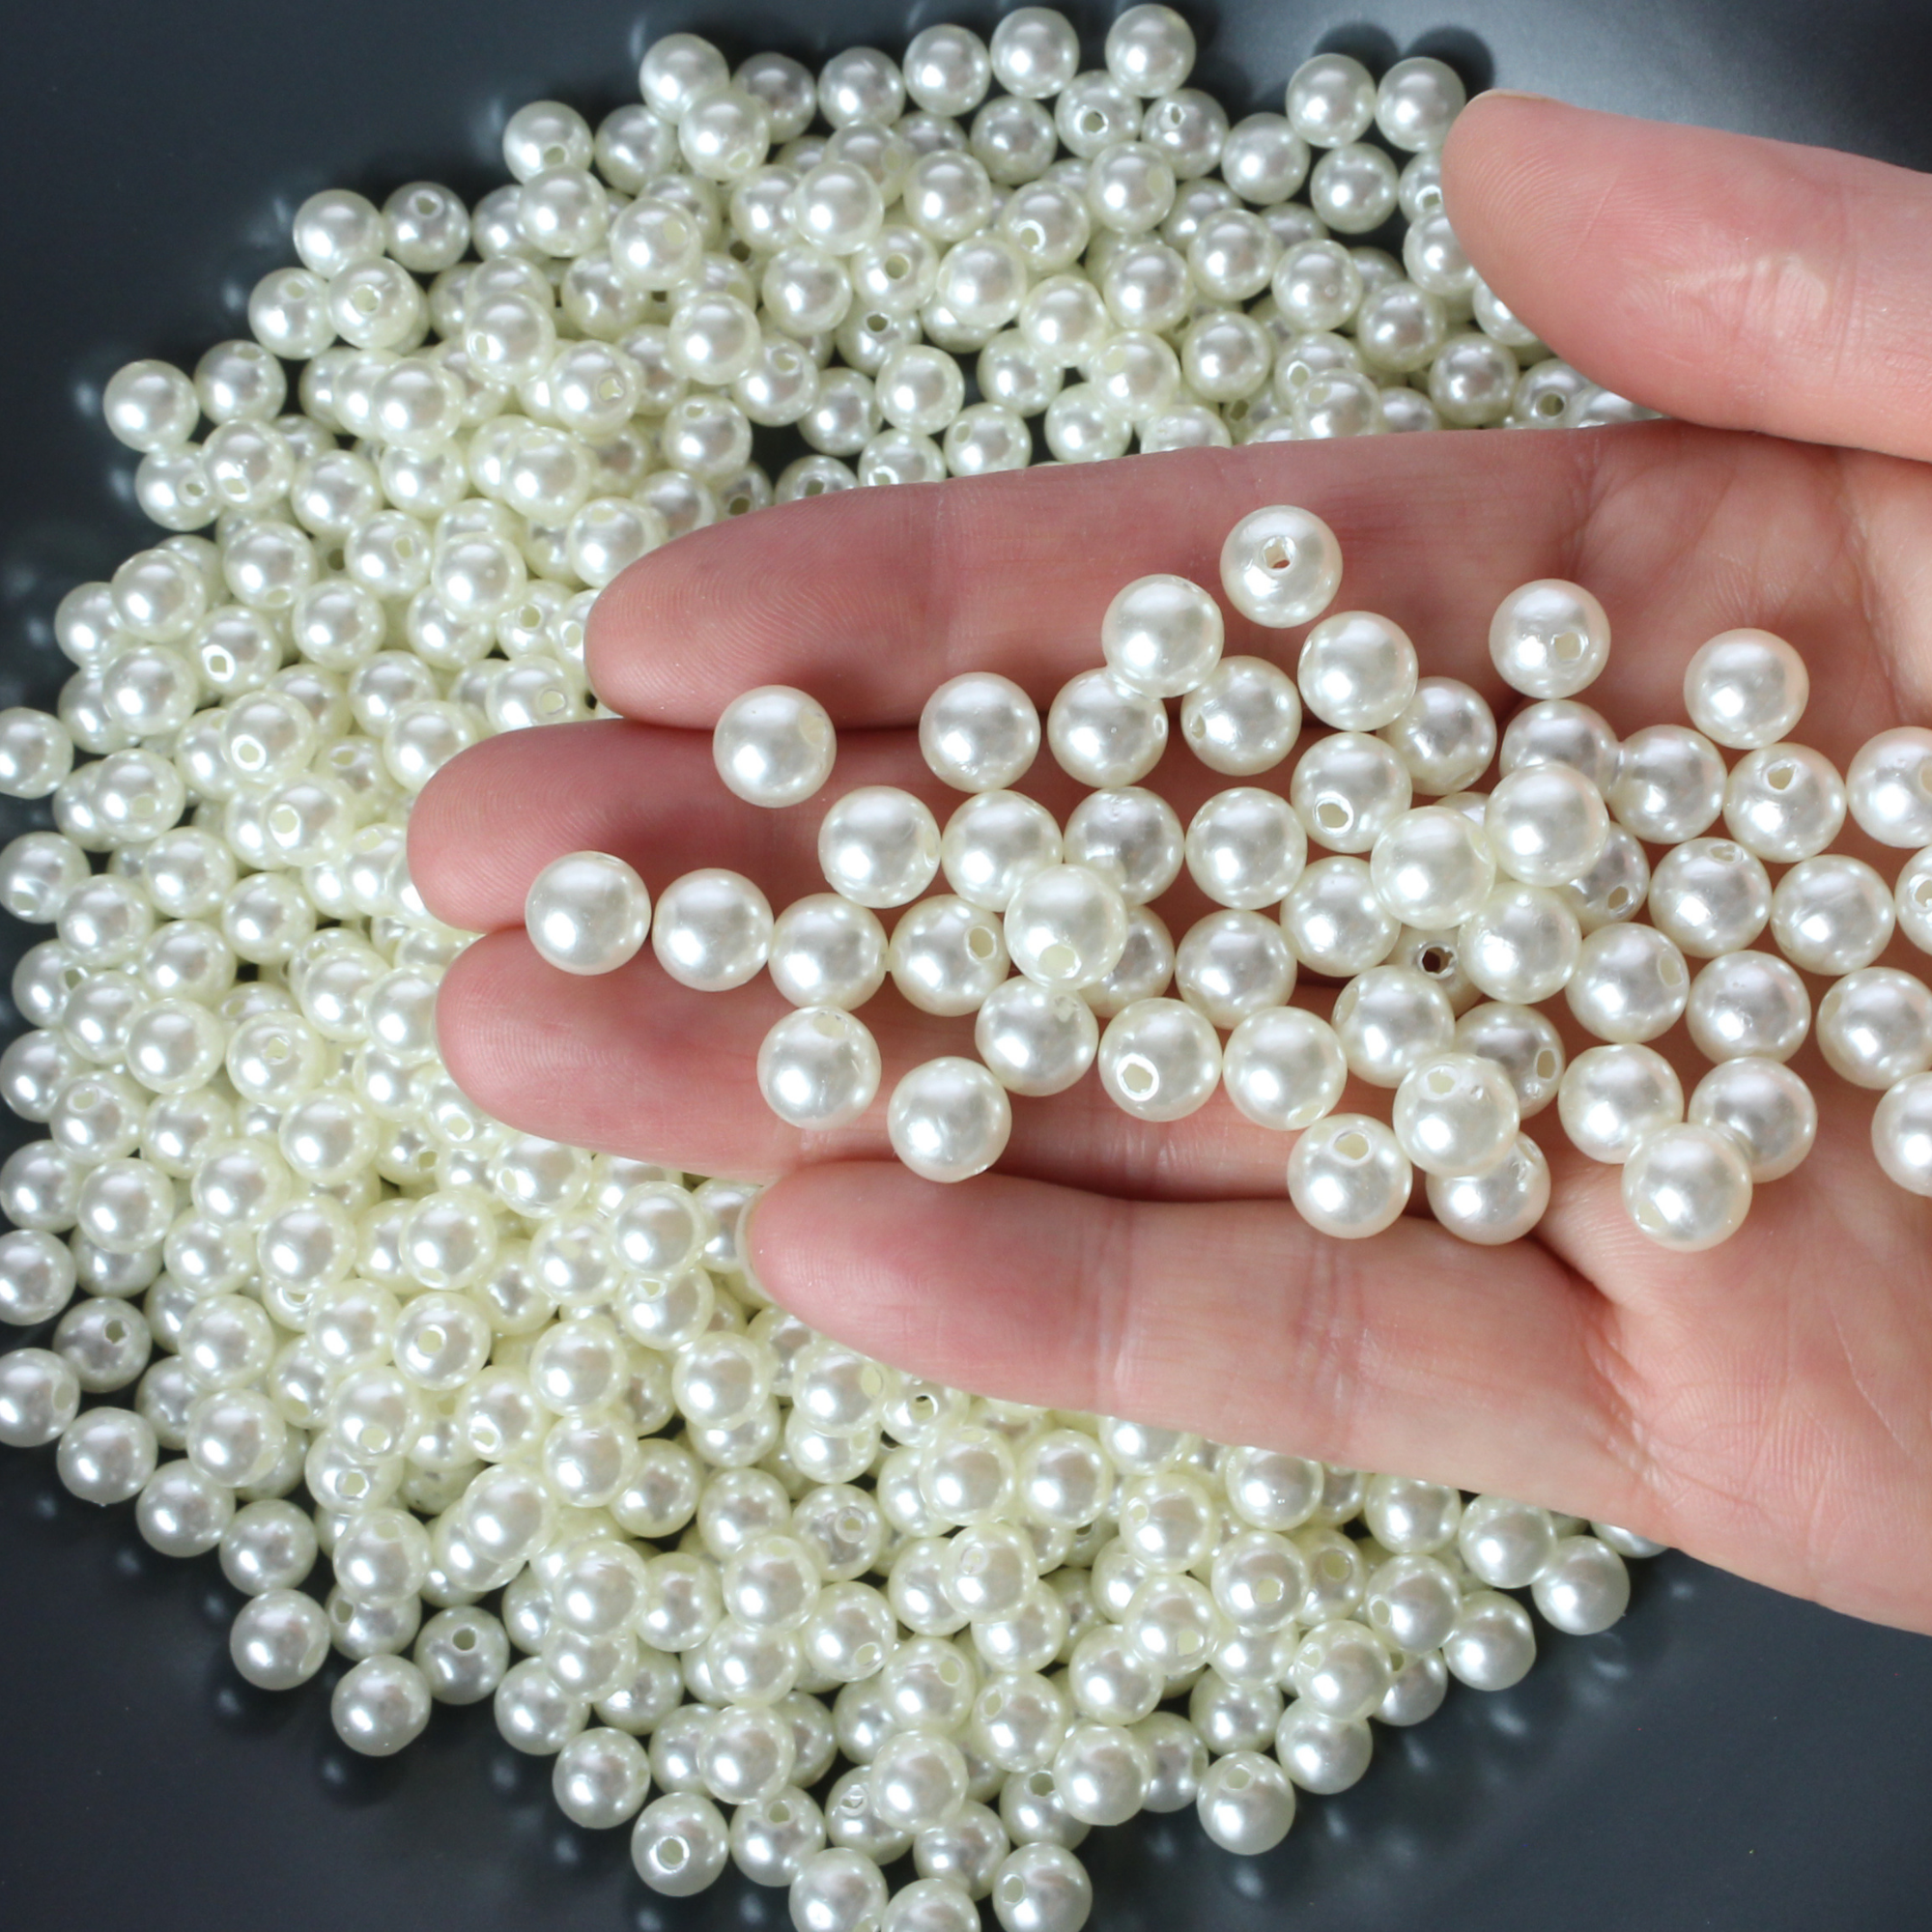 Plastic imitation pearl beads that are 8mm round with a 2mm hole size.